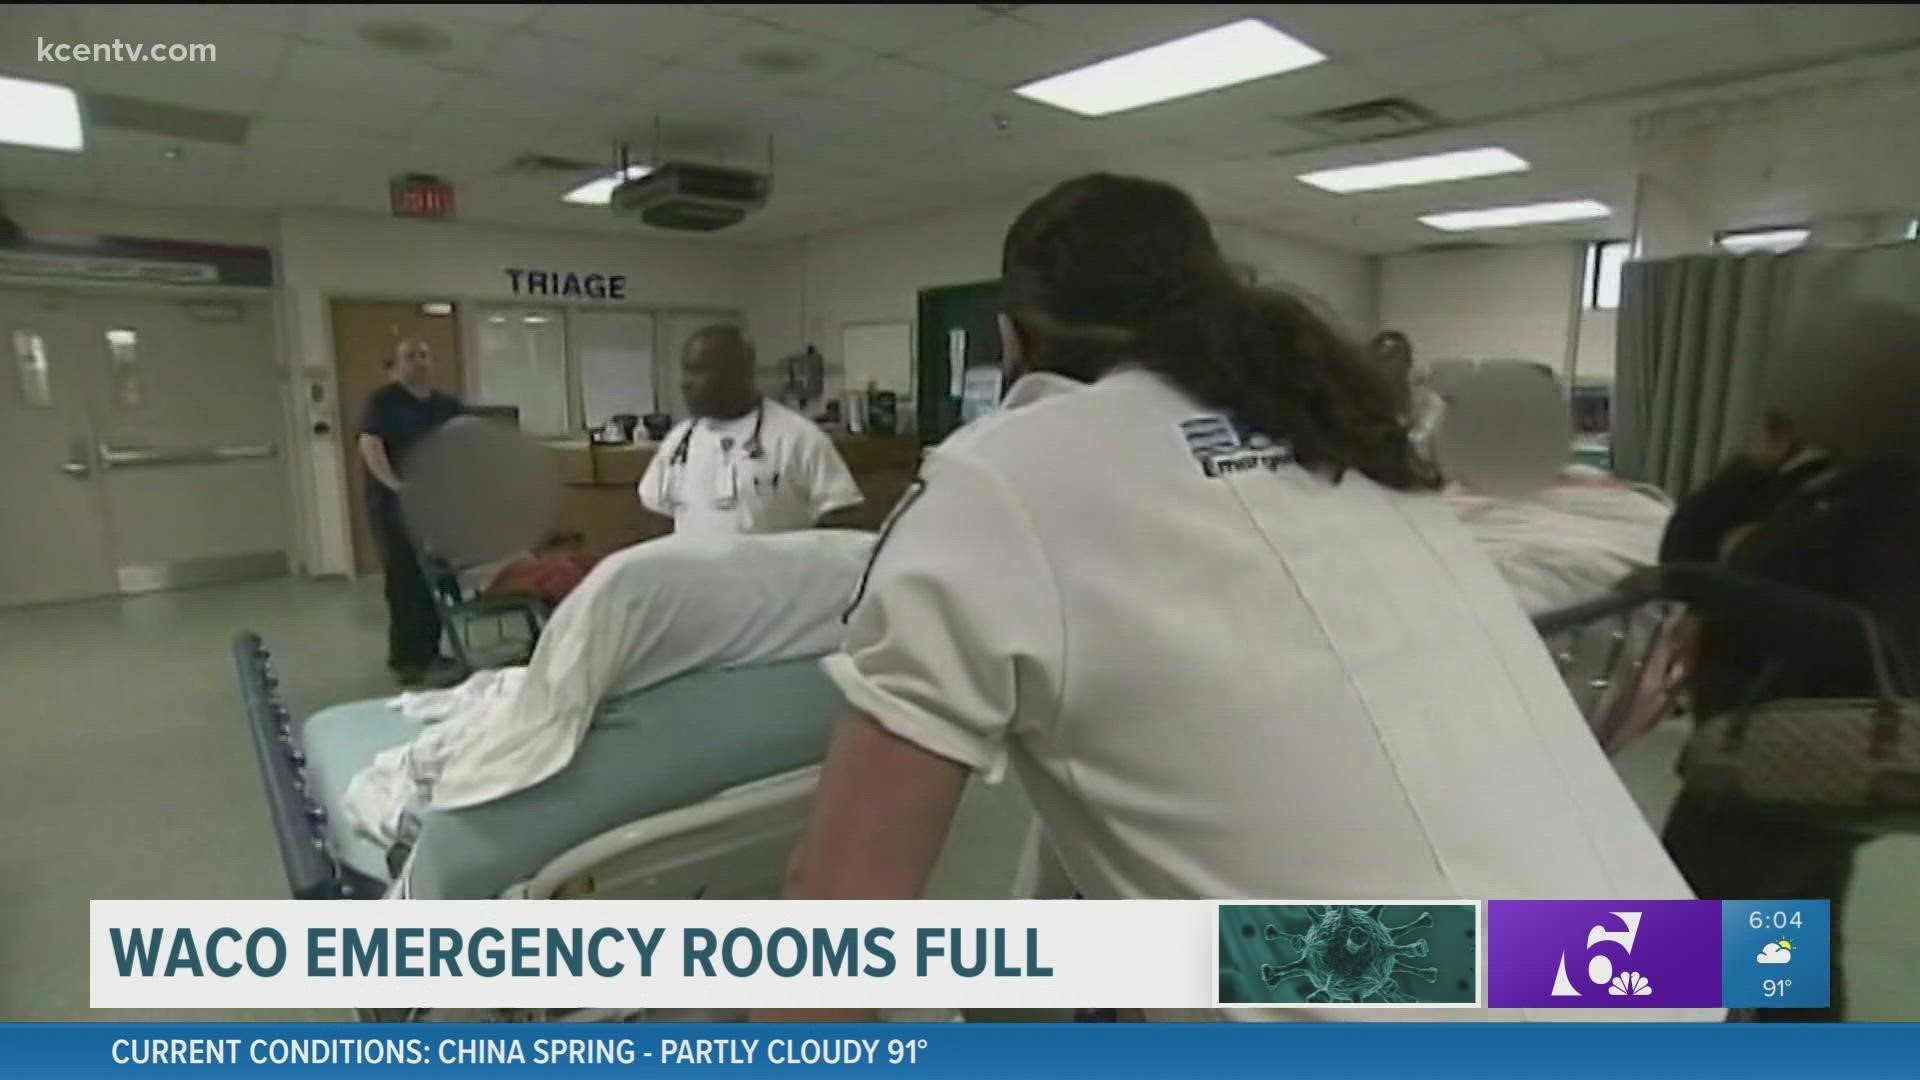 Hospitals say they are using other areas for ICU beds like surgery rooms.